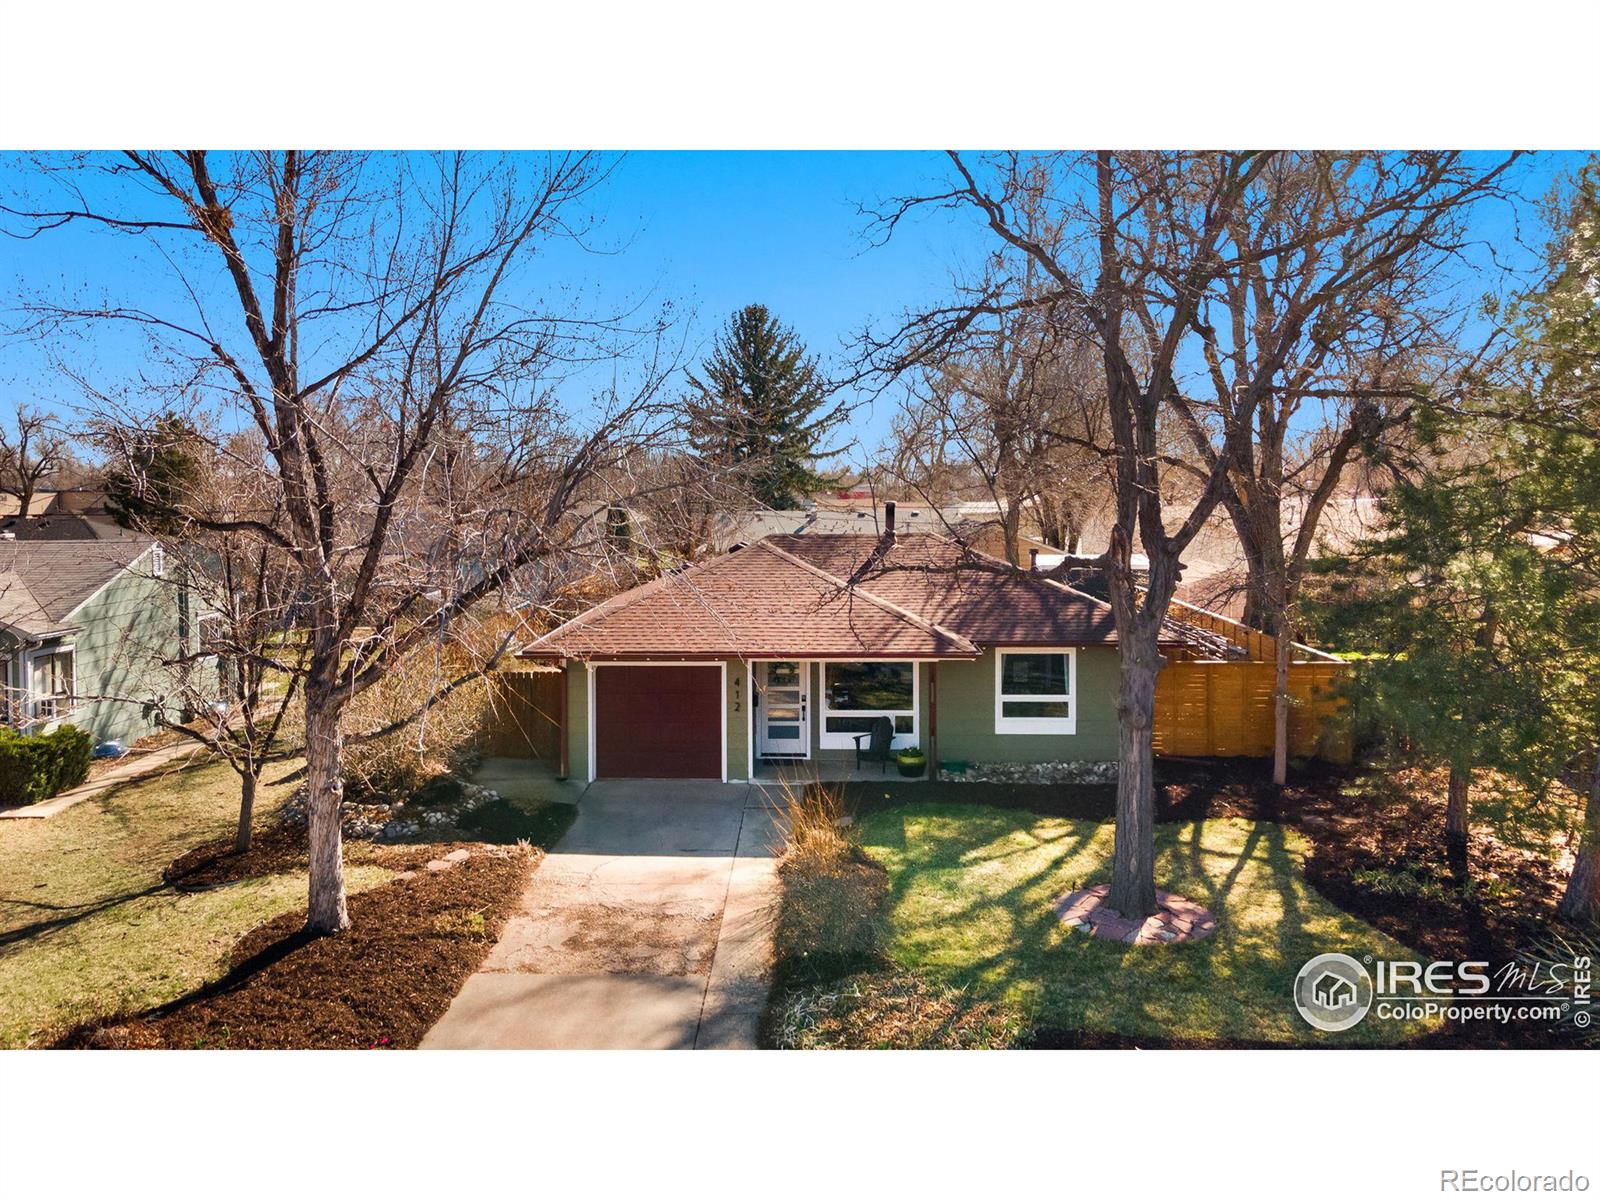 412  Smith Street, fort collins MLS: 4567891006504 Beds: 2 Baths: 1 Price: $550,000